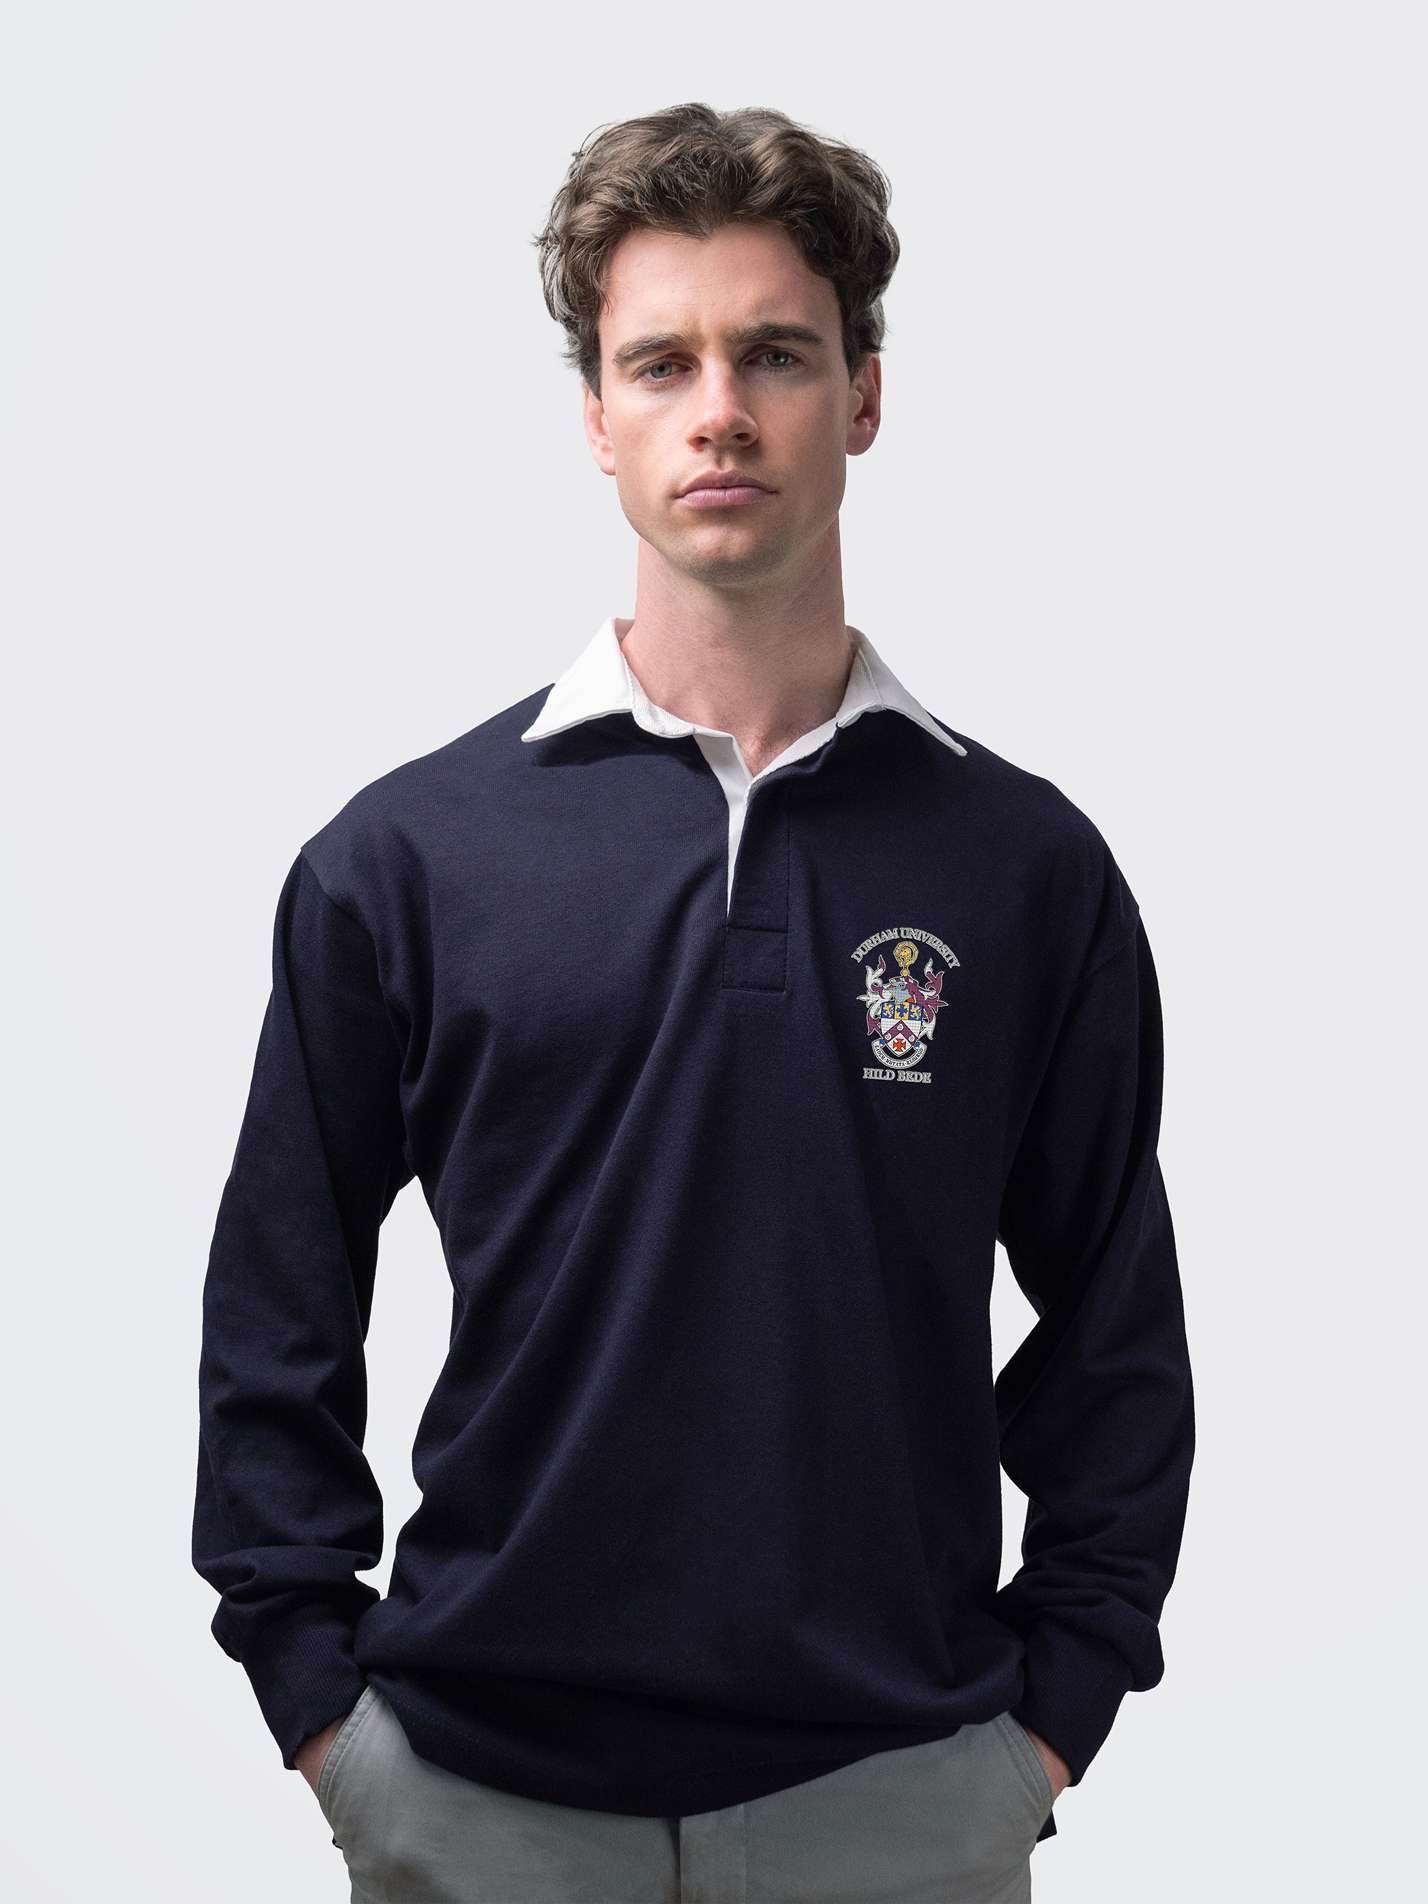 St Hild and St Bede student wearing an embroidered mens rugby shirt in navy